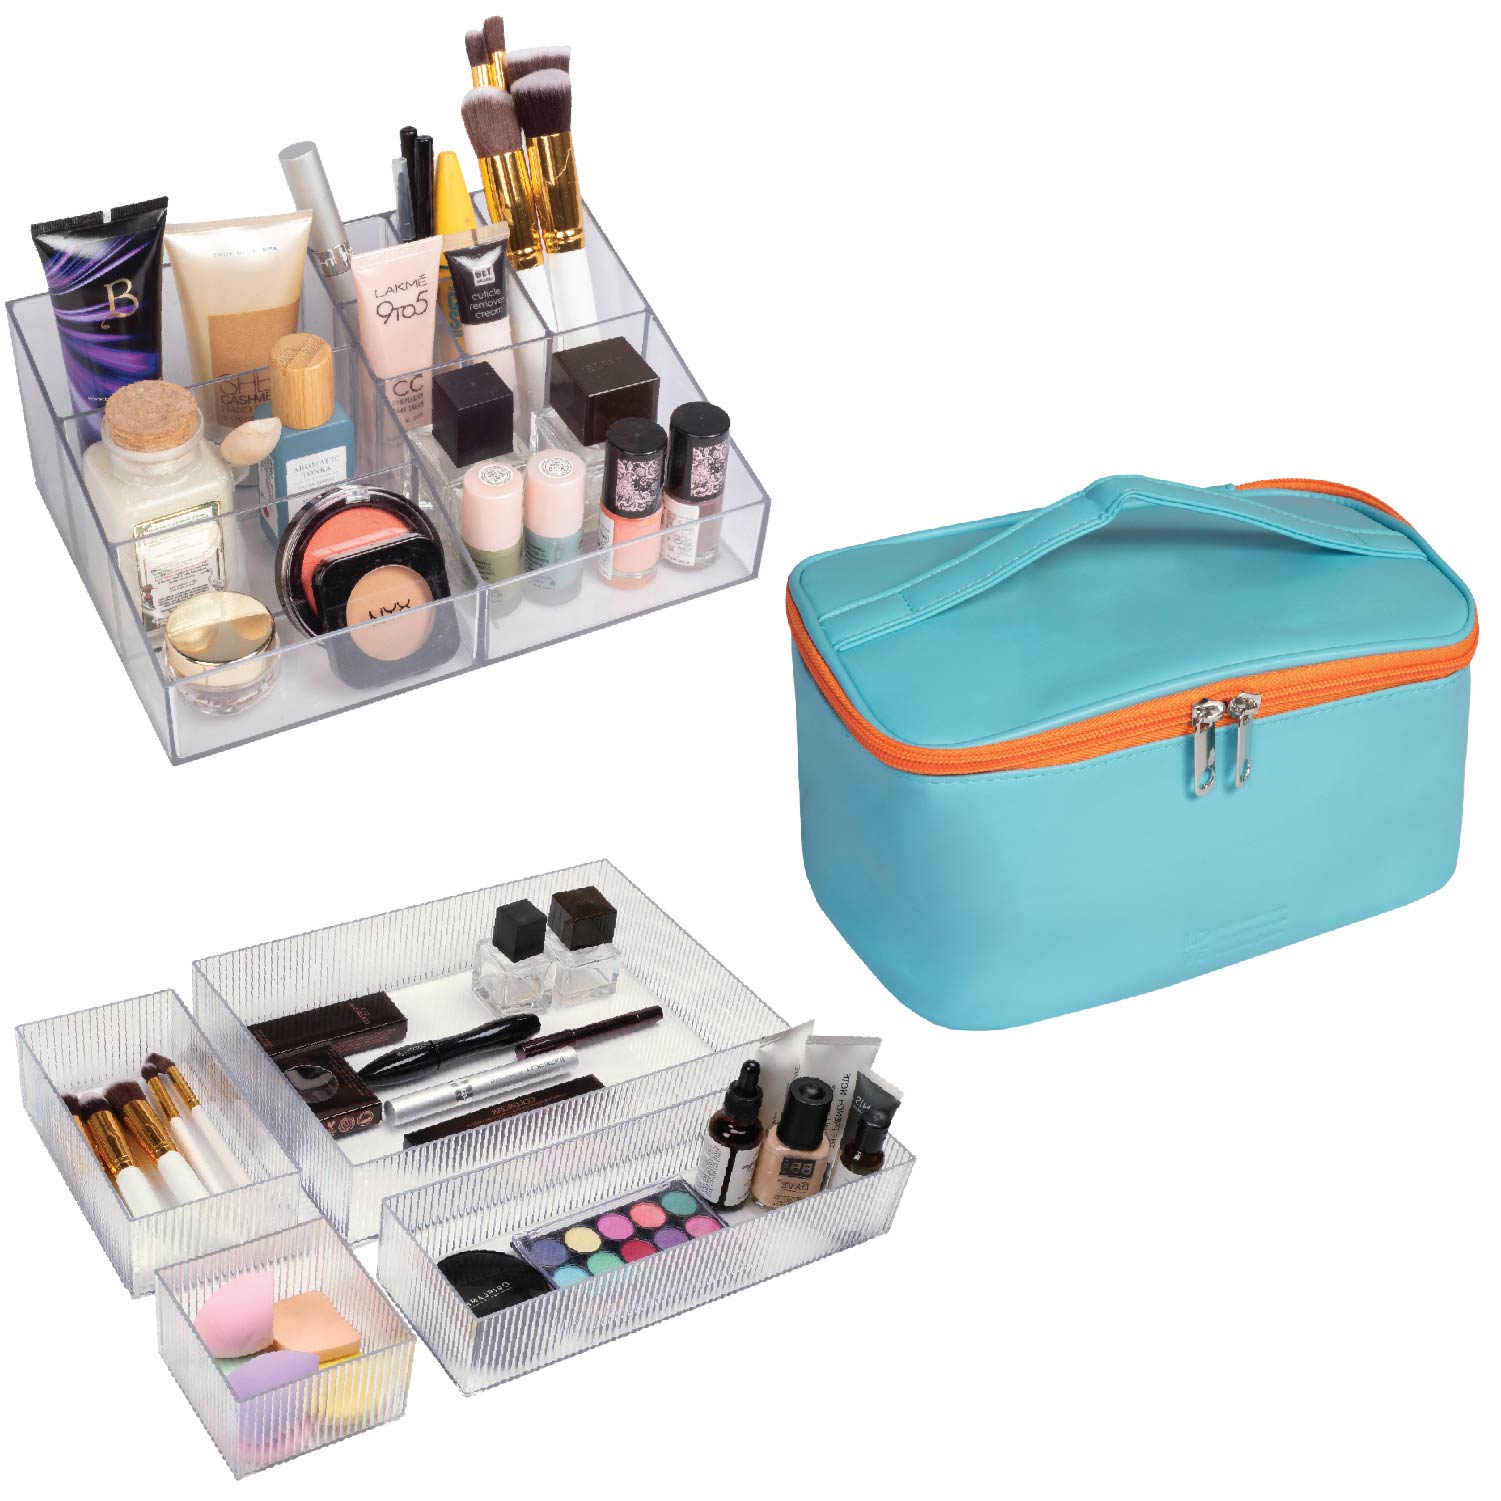 Combo of 1pc of Acrylic Makeup/Cosmetics Organizer, 4pc of Drawer Organizer & 1pc of Carry All Case, Large Toiletry Bag Organizer